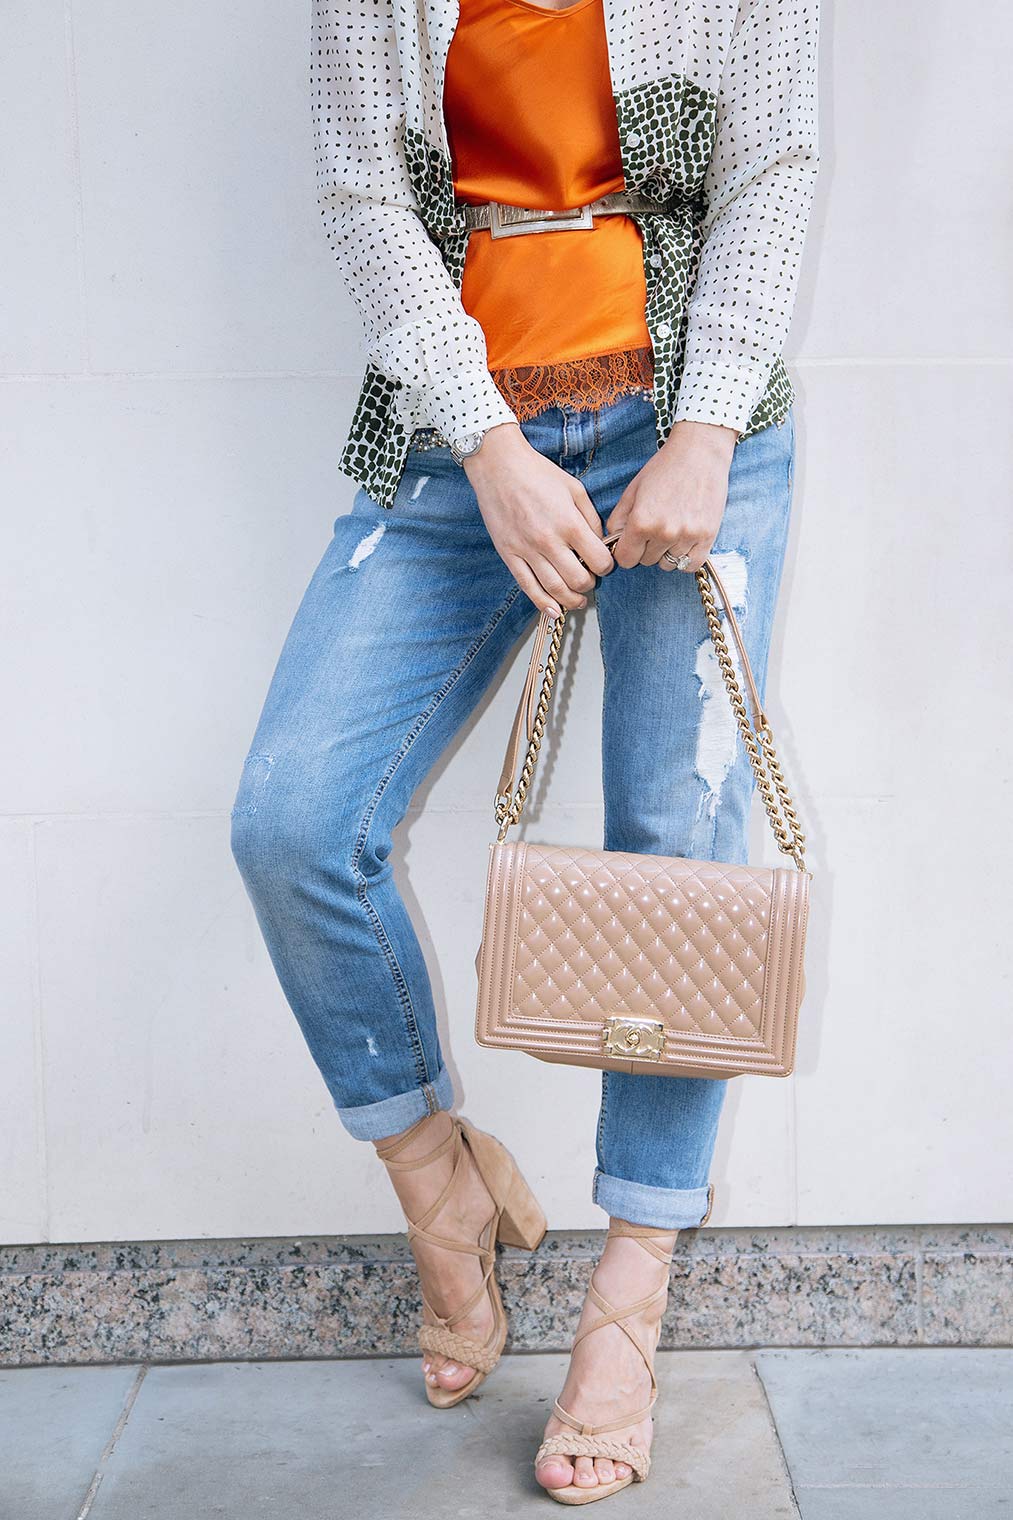 Chic outfit with boyfriend jeans